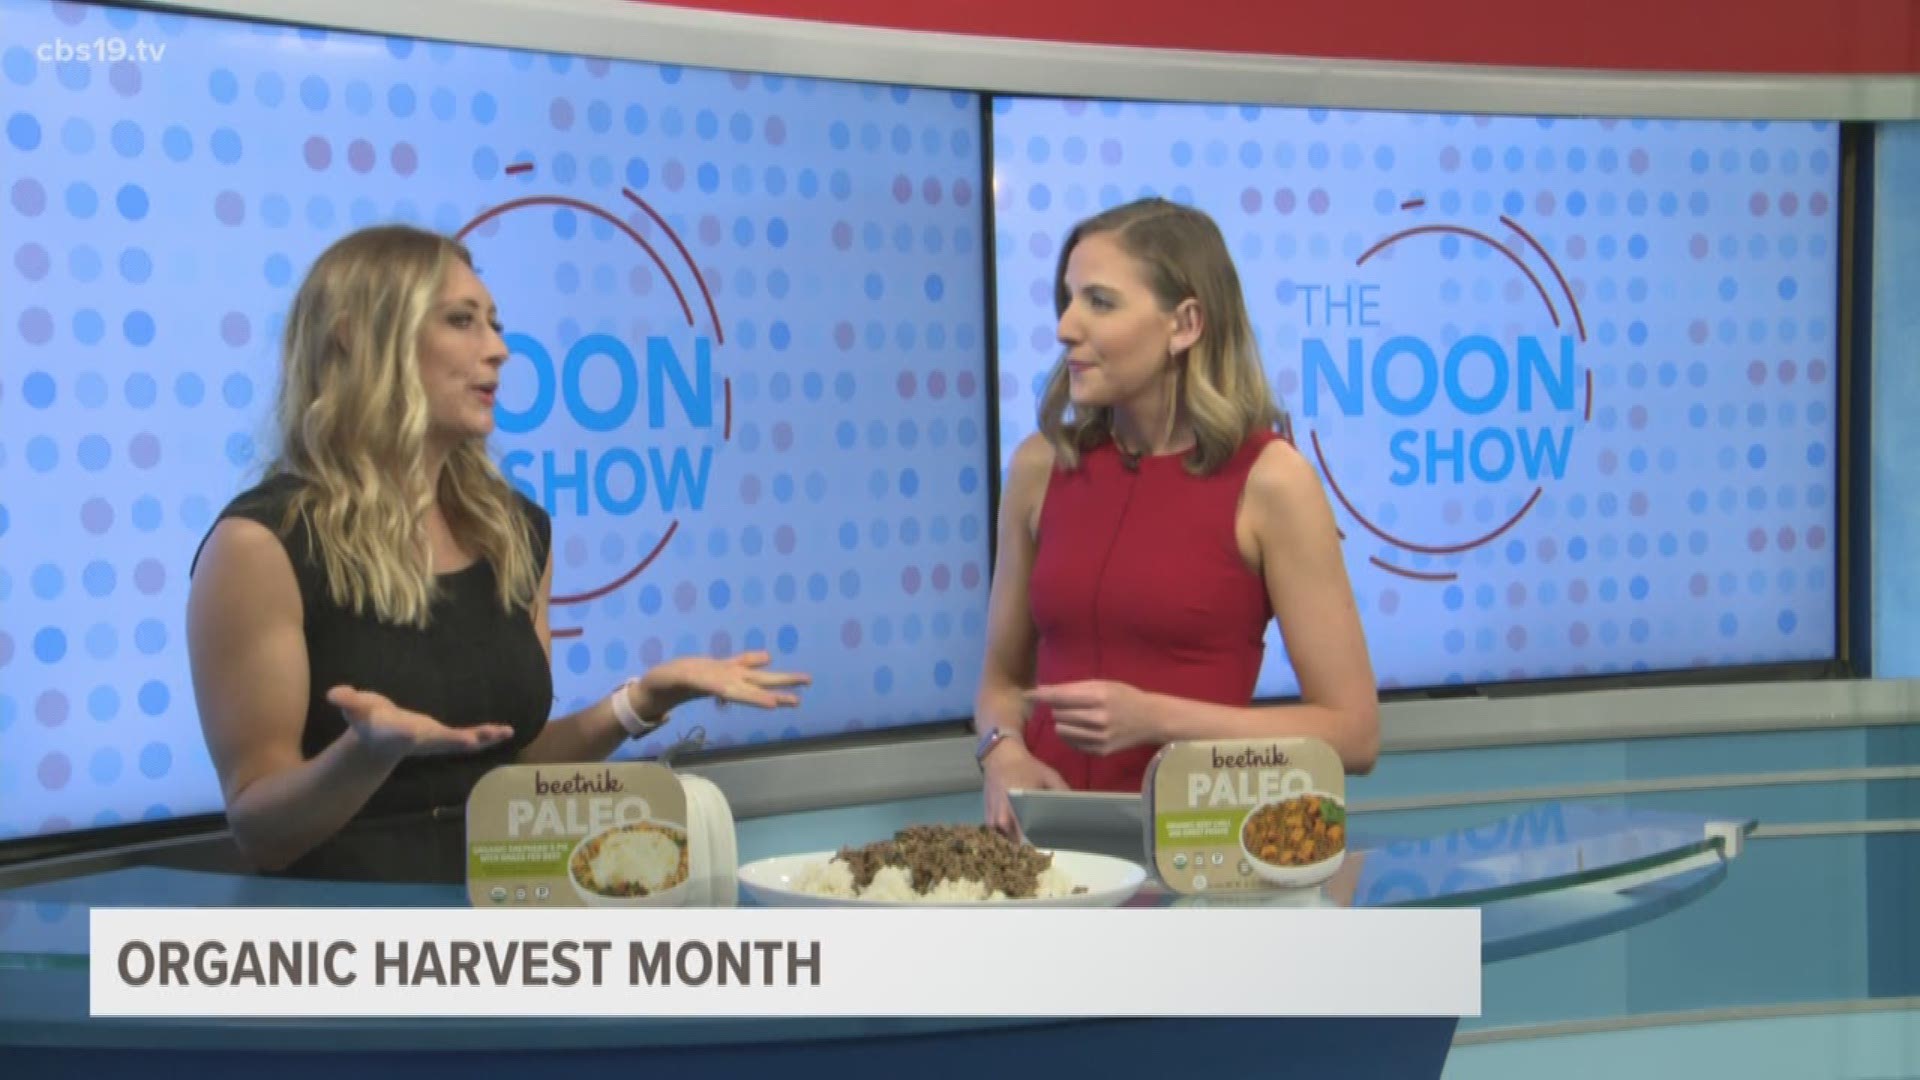 The Noon Show is celebrating Organic Harvest Month! Malorie Moore with Be Moore Fit shows us some easy to make organic recipes from home.